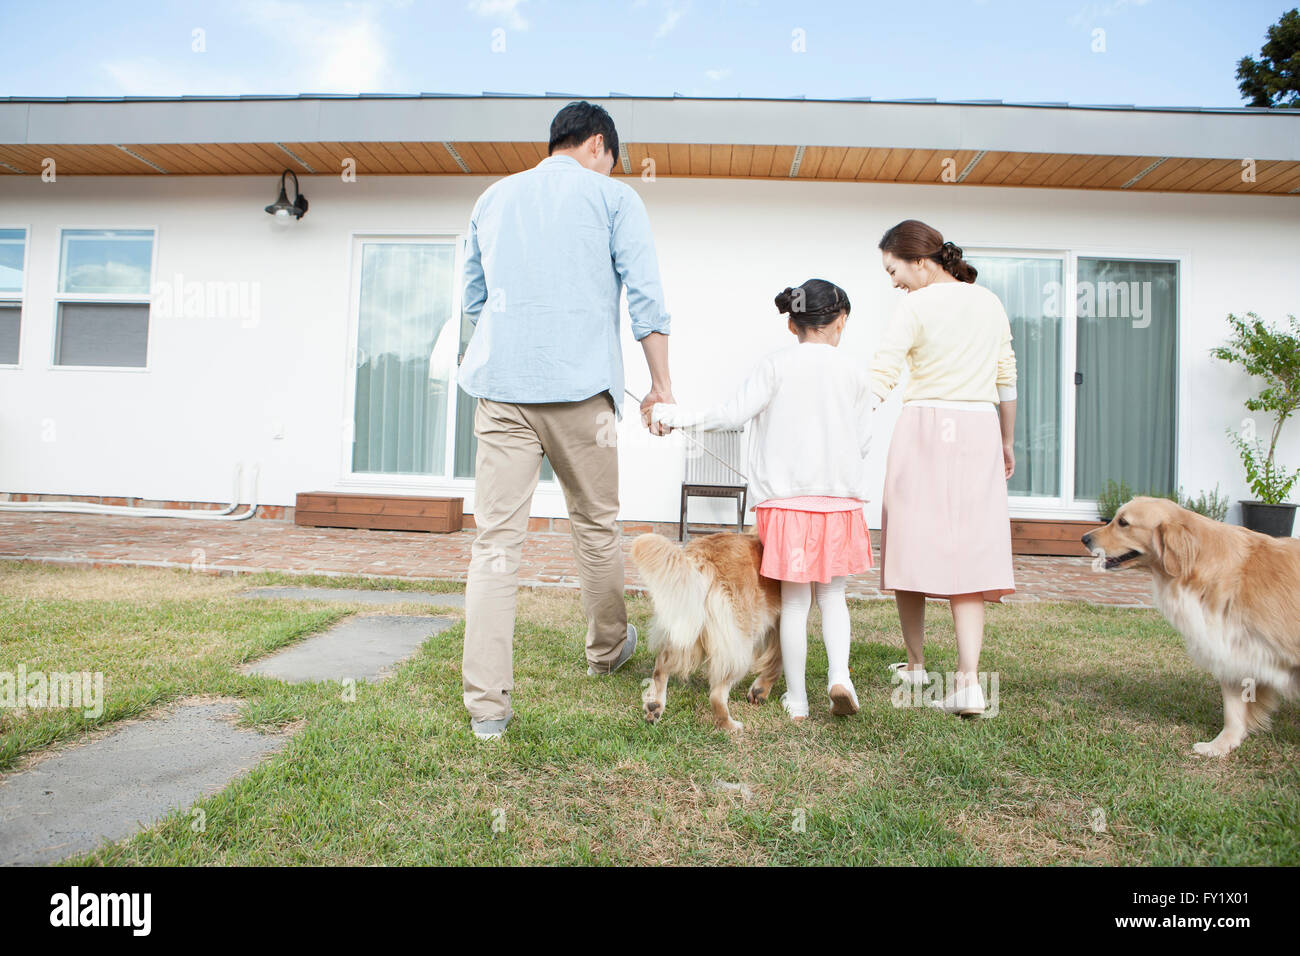 Back appearance of a family with dogs at the yard of their house representing rural living Stock Photo